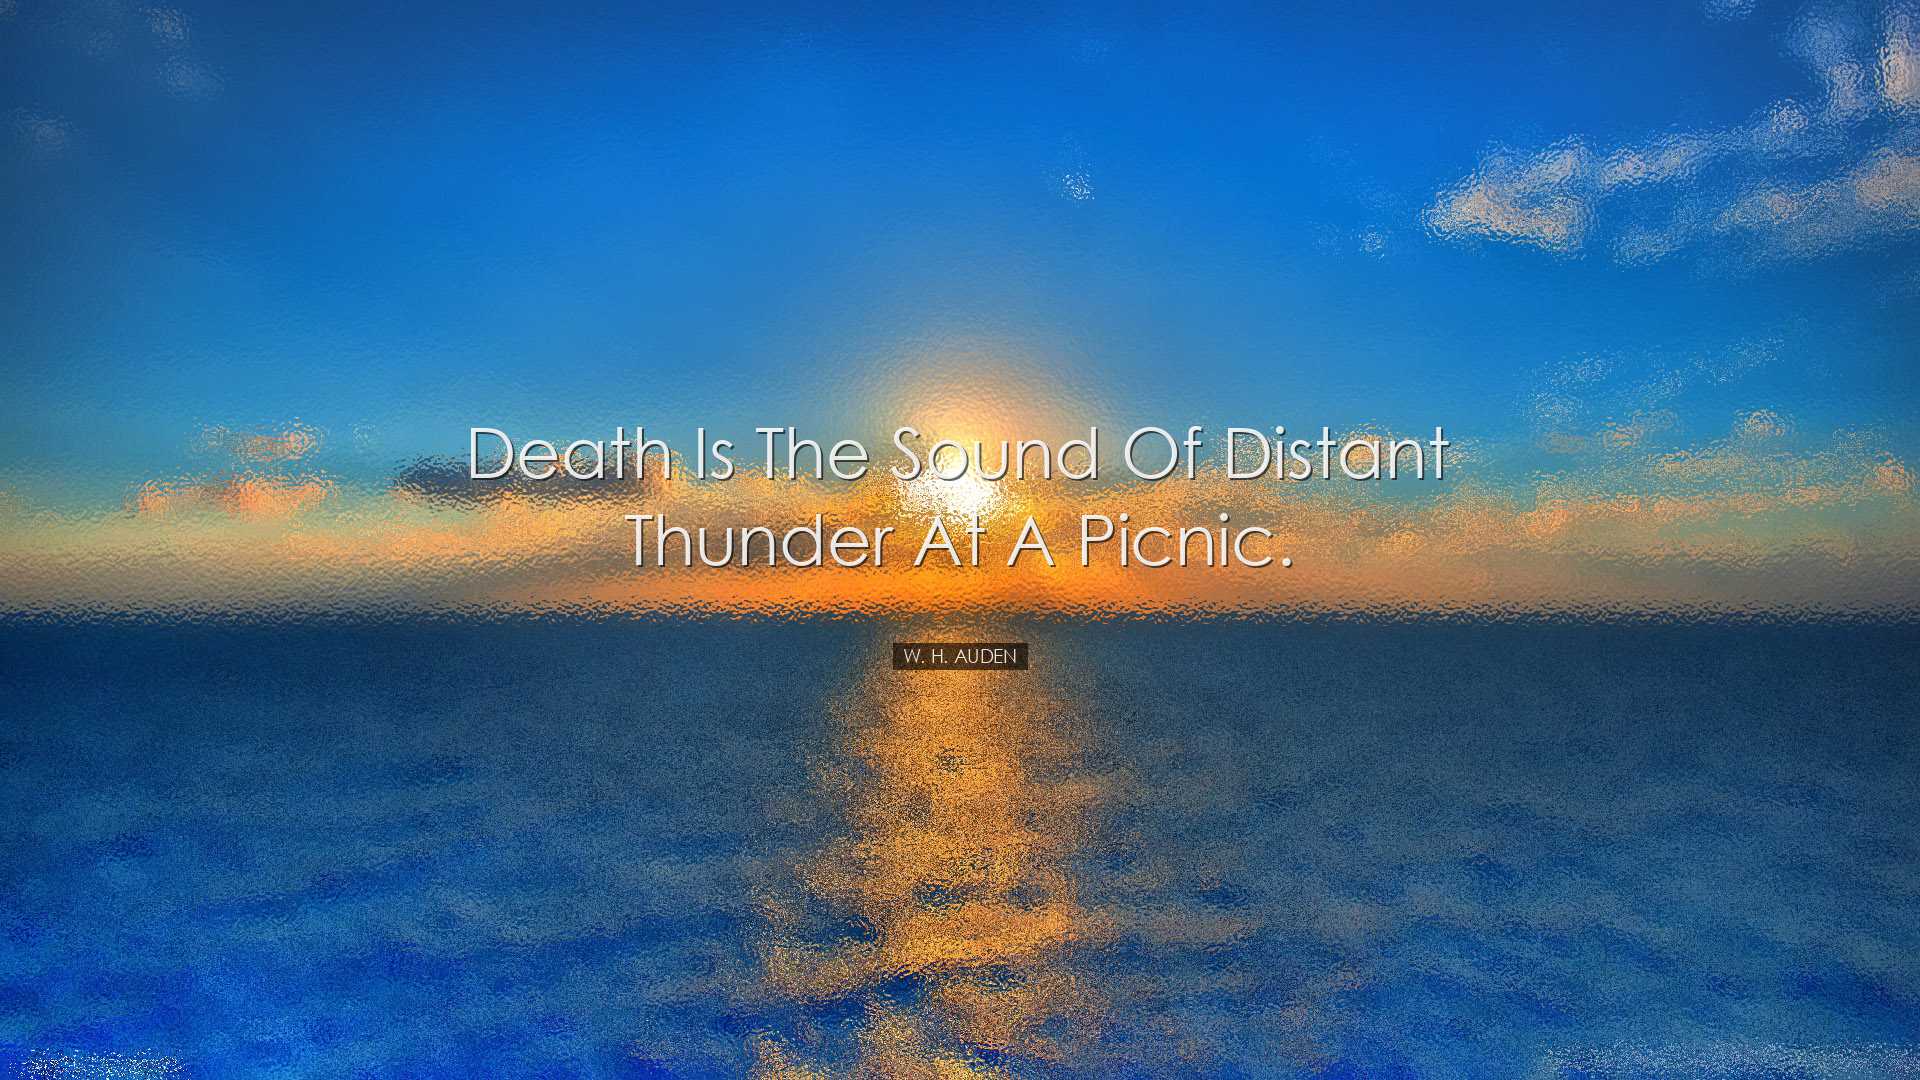 Death is the sound of distant thunder at a picnic. - W. H. Auden